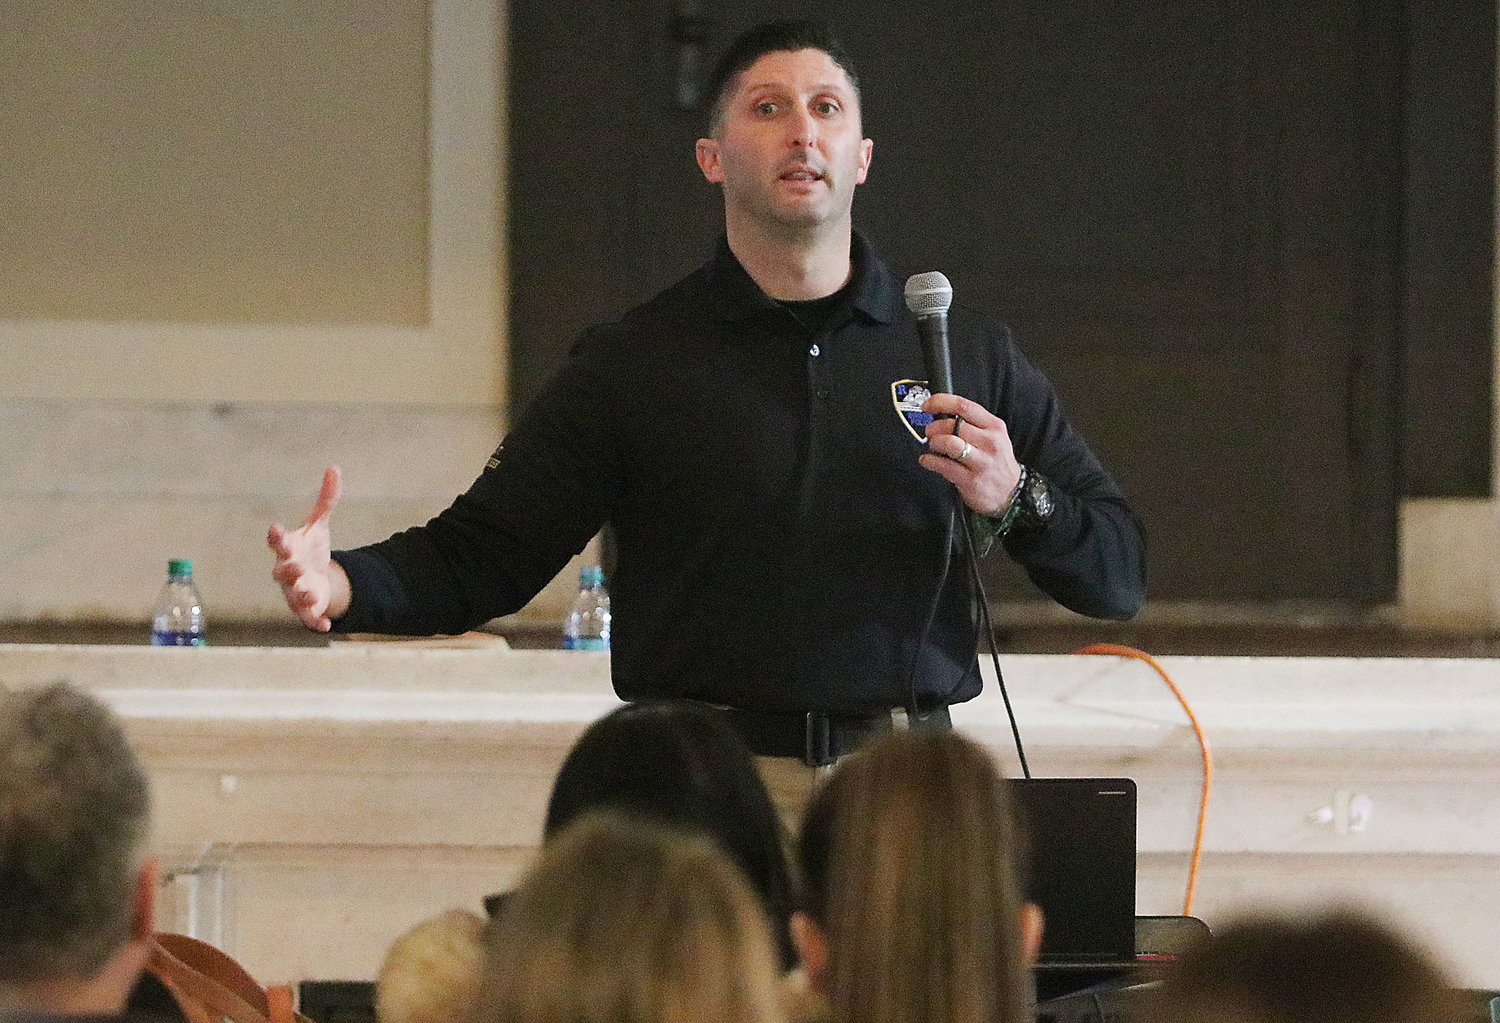 Lt. Steven St. Pierre speaks to teachers in the Colt School auditorium during an active shooter training at the school on Thursday.